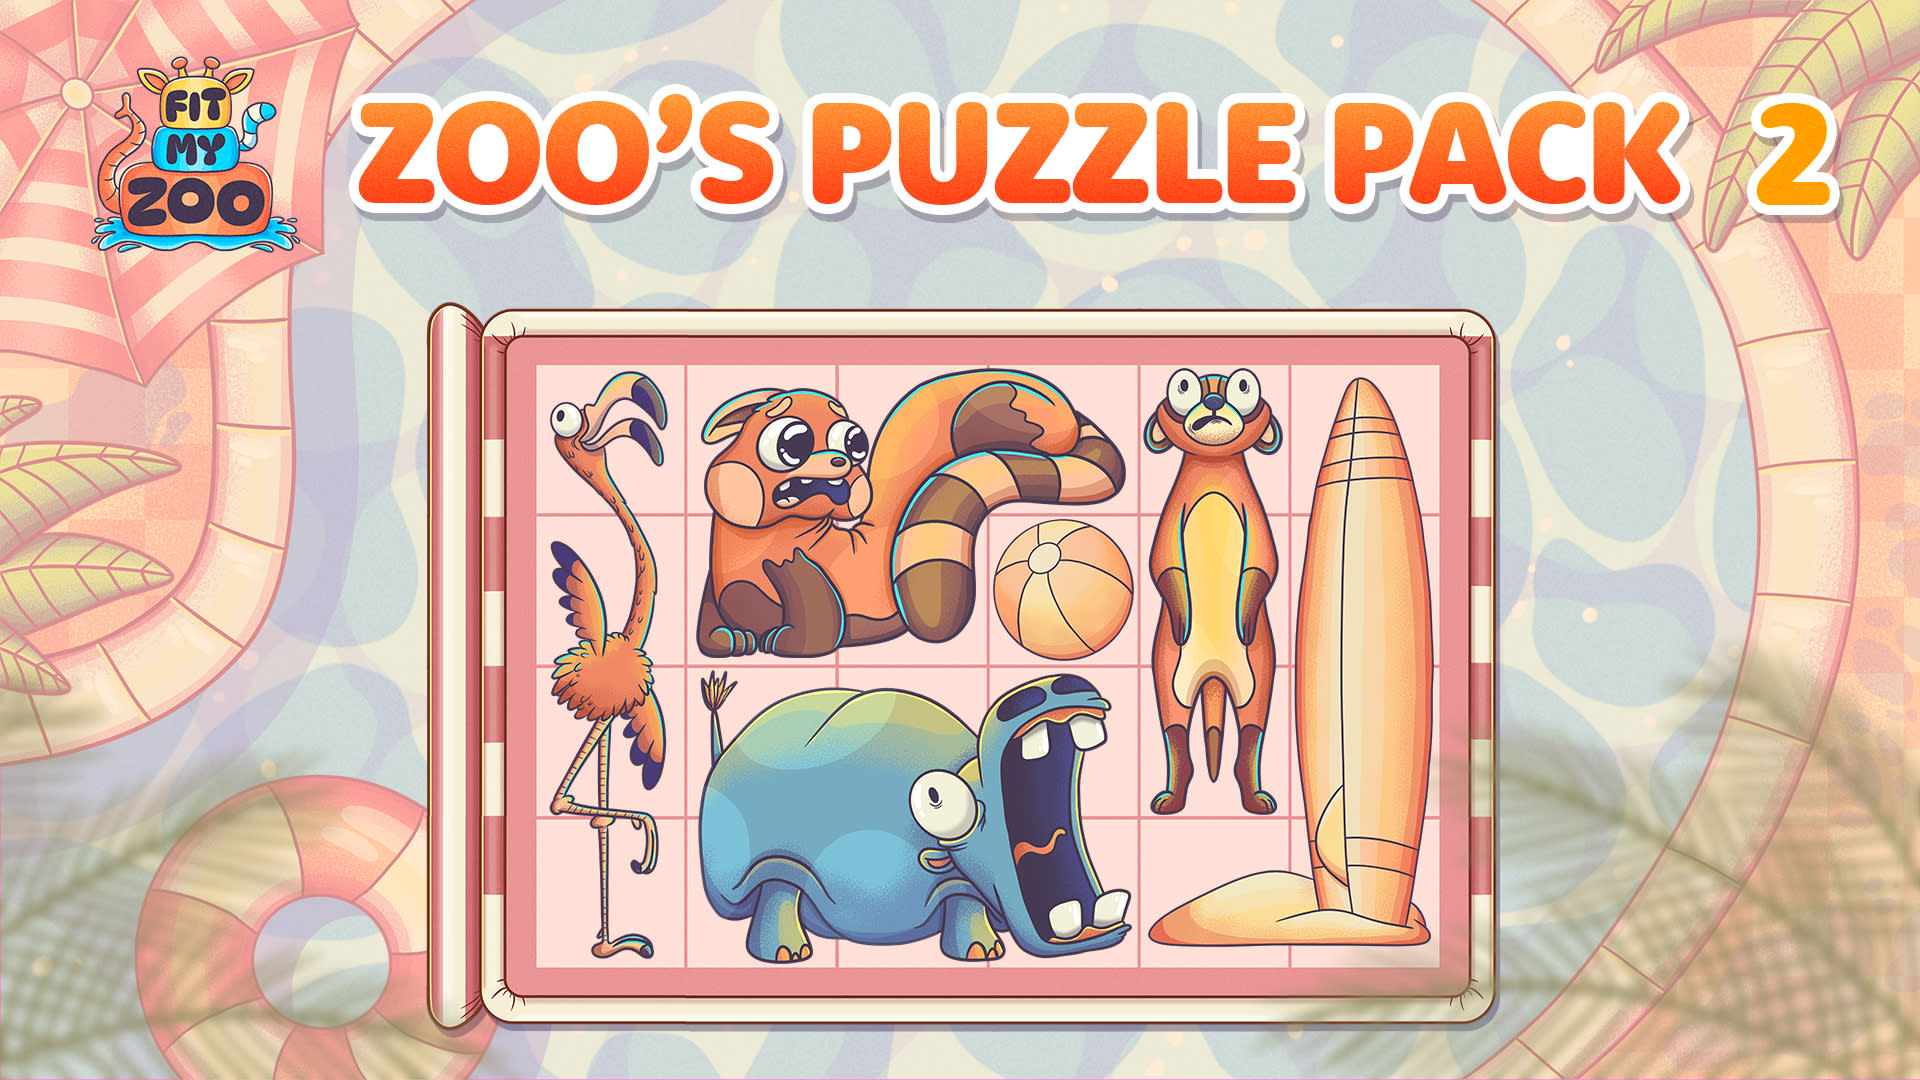 Zoo's Puzzle Pack 2